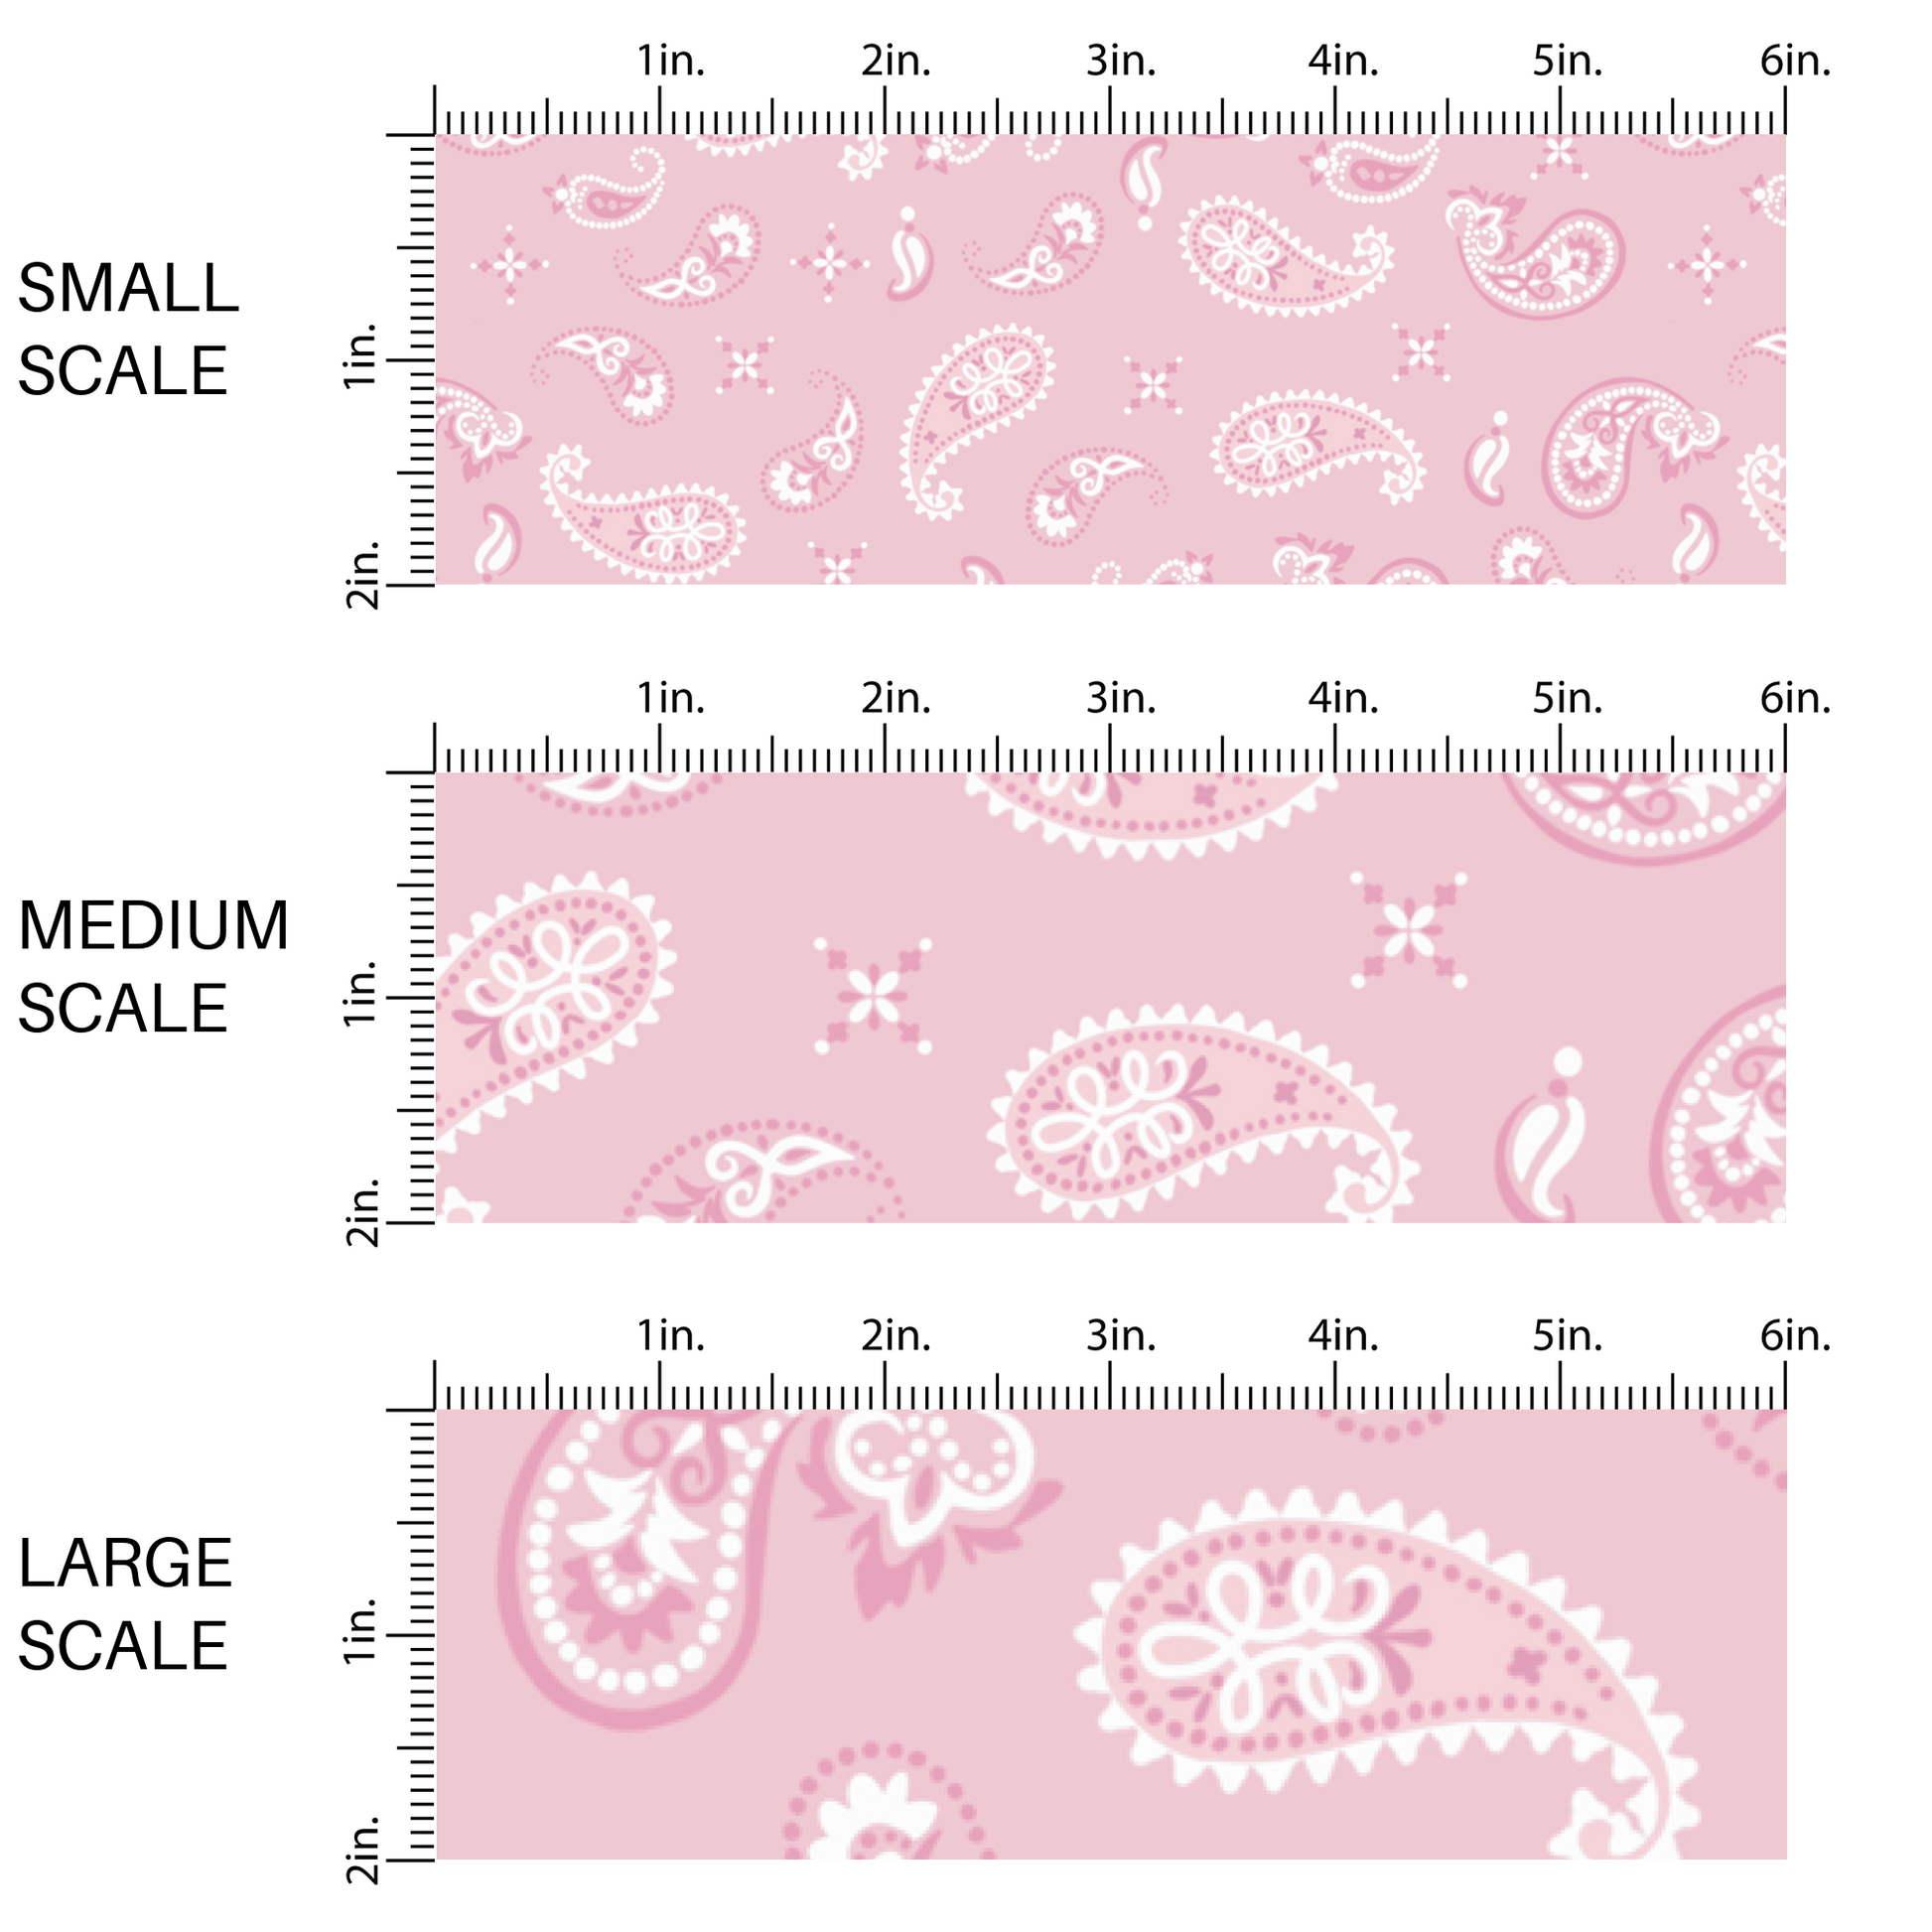 This chart shows small scale, medium scale, and large scale pastel pink bandana pattern western themed fabric by the yard. 